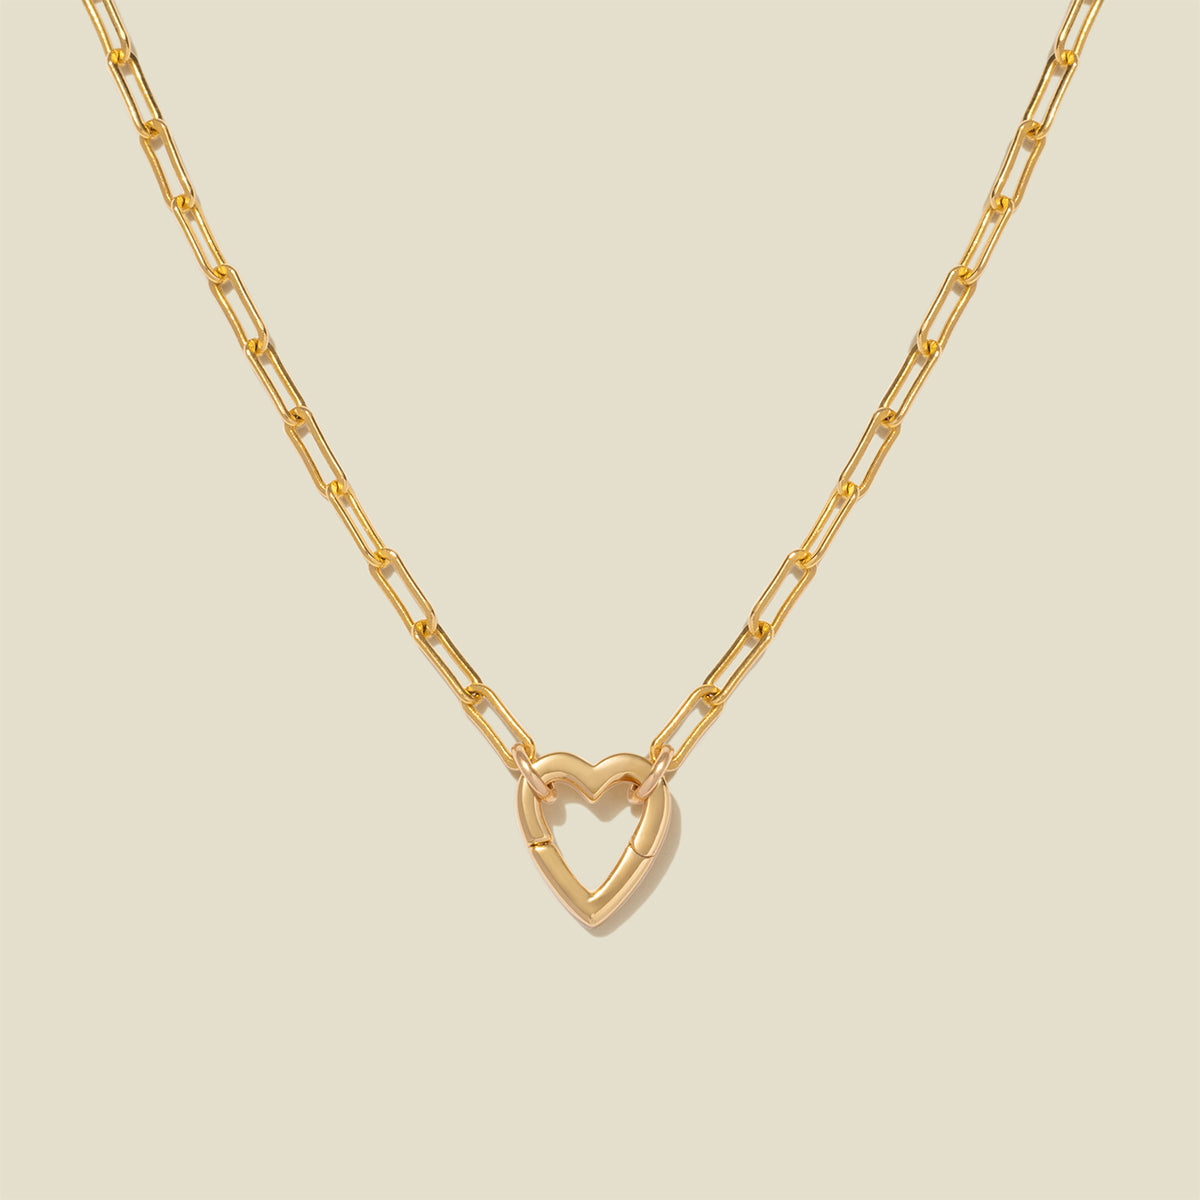 Jude Charm Necklace Gold Filled / With Heart Link Lock Necklace